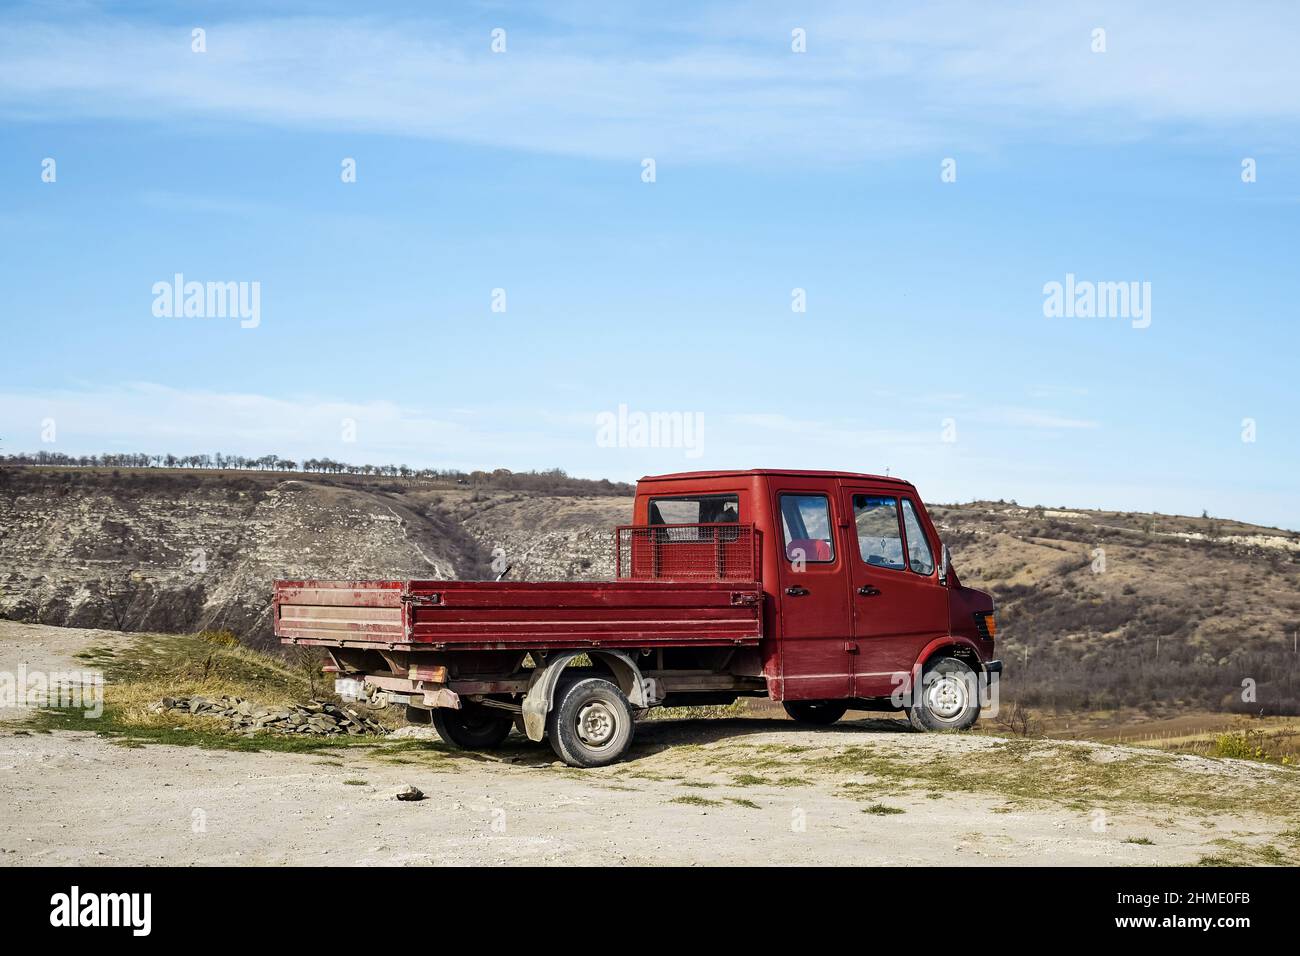 Moldova, Old Orhei, November 2019: The old little red truck stop at the edge of the cliff. Scenic Mountain View. Blue sky. Stock Photo